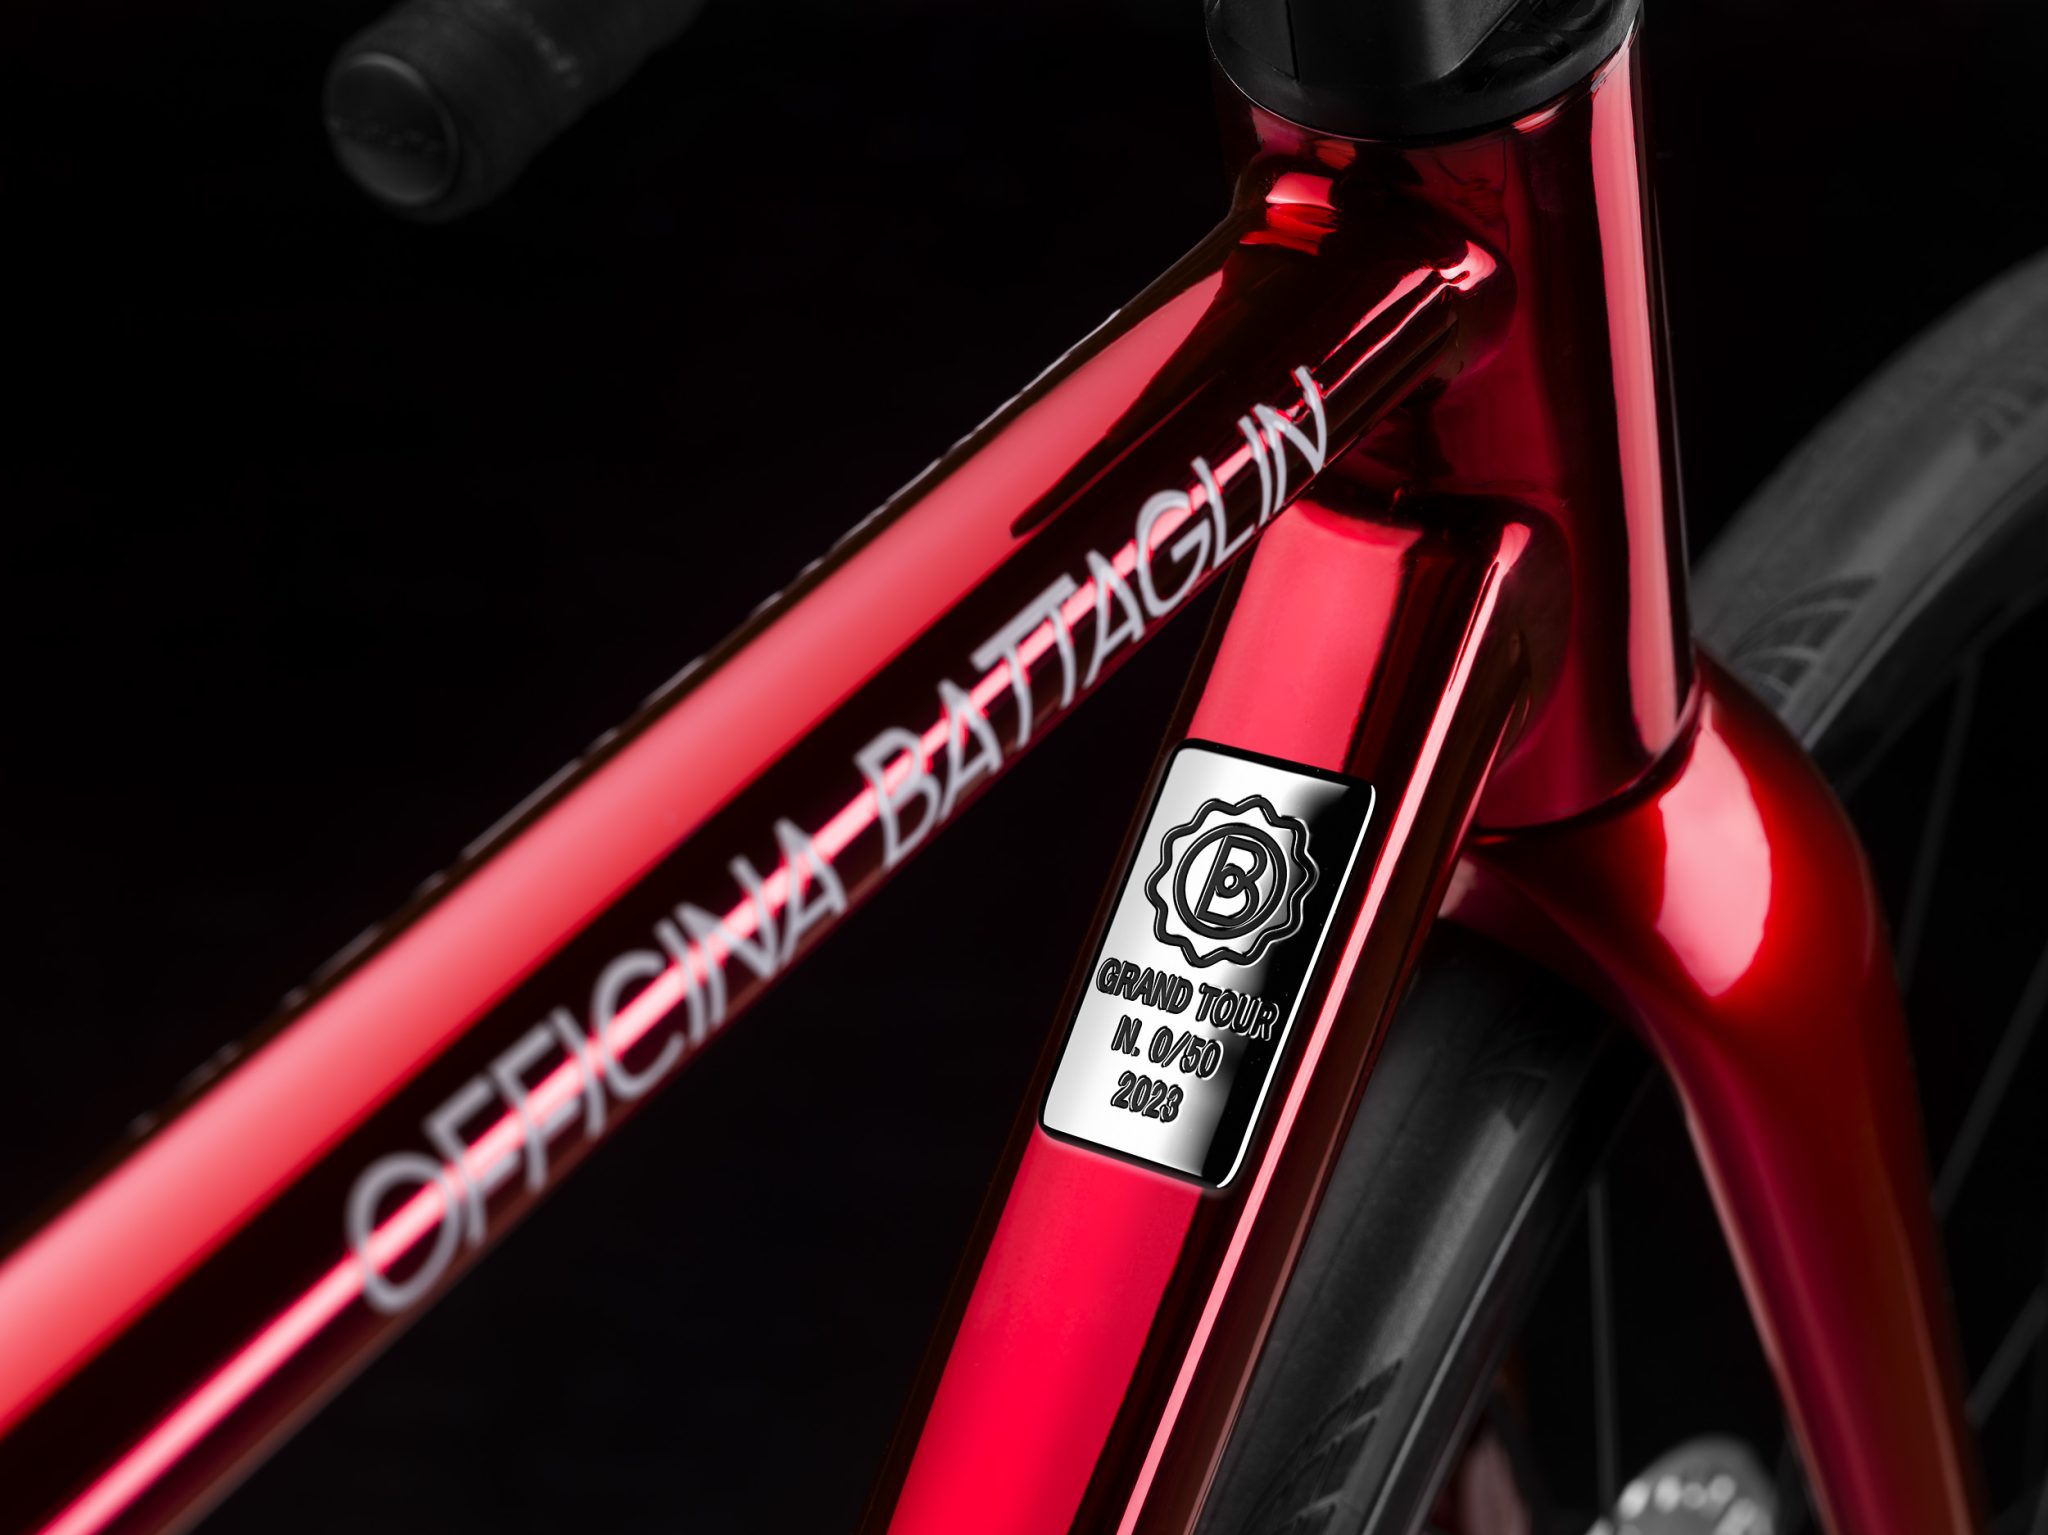 Battaglin Grand Tour: Production limited to 50 frames per year